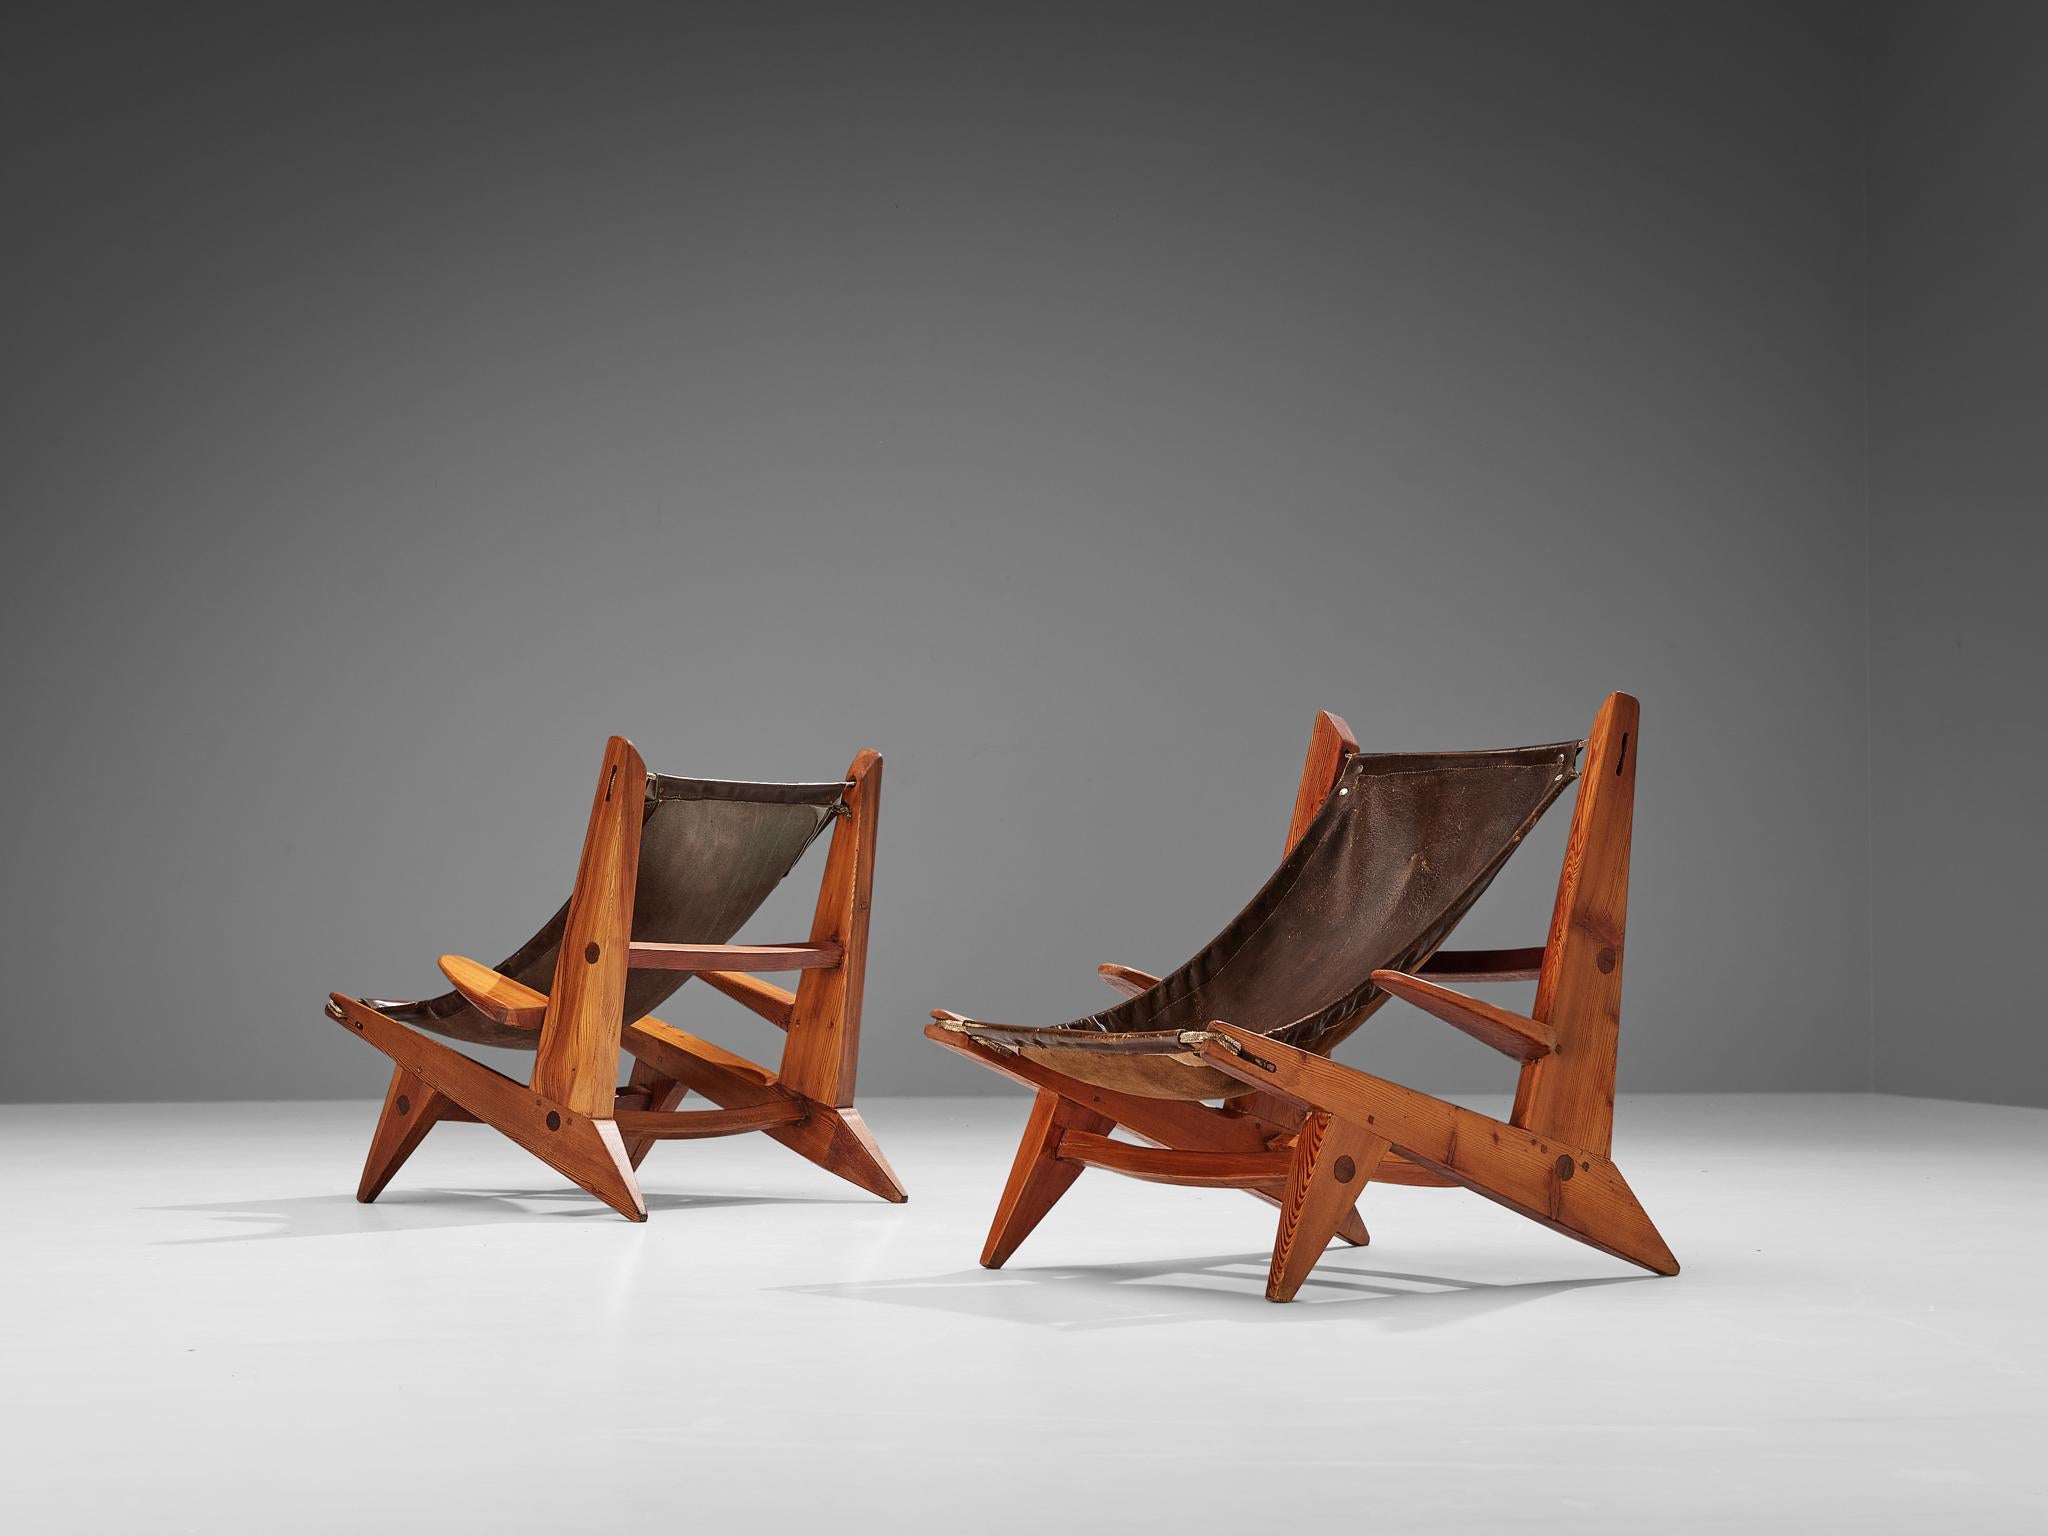 Pair of hunting chairs, leather, pine, France, 1950s

This pair of hunting chairs features wonderful patinated leather on both seat and back. The chairs are sculpturally built with a chunky touch. The pine wood is a natural grained, strong and